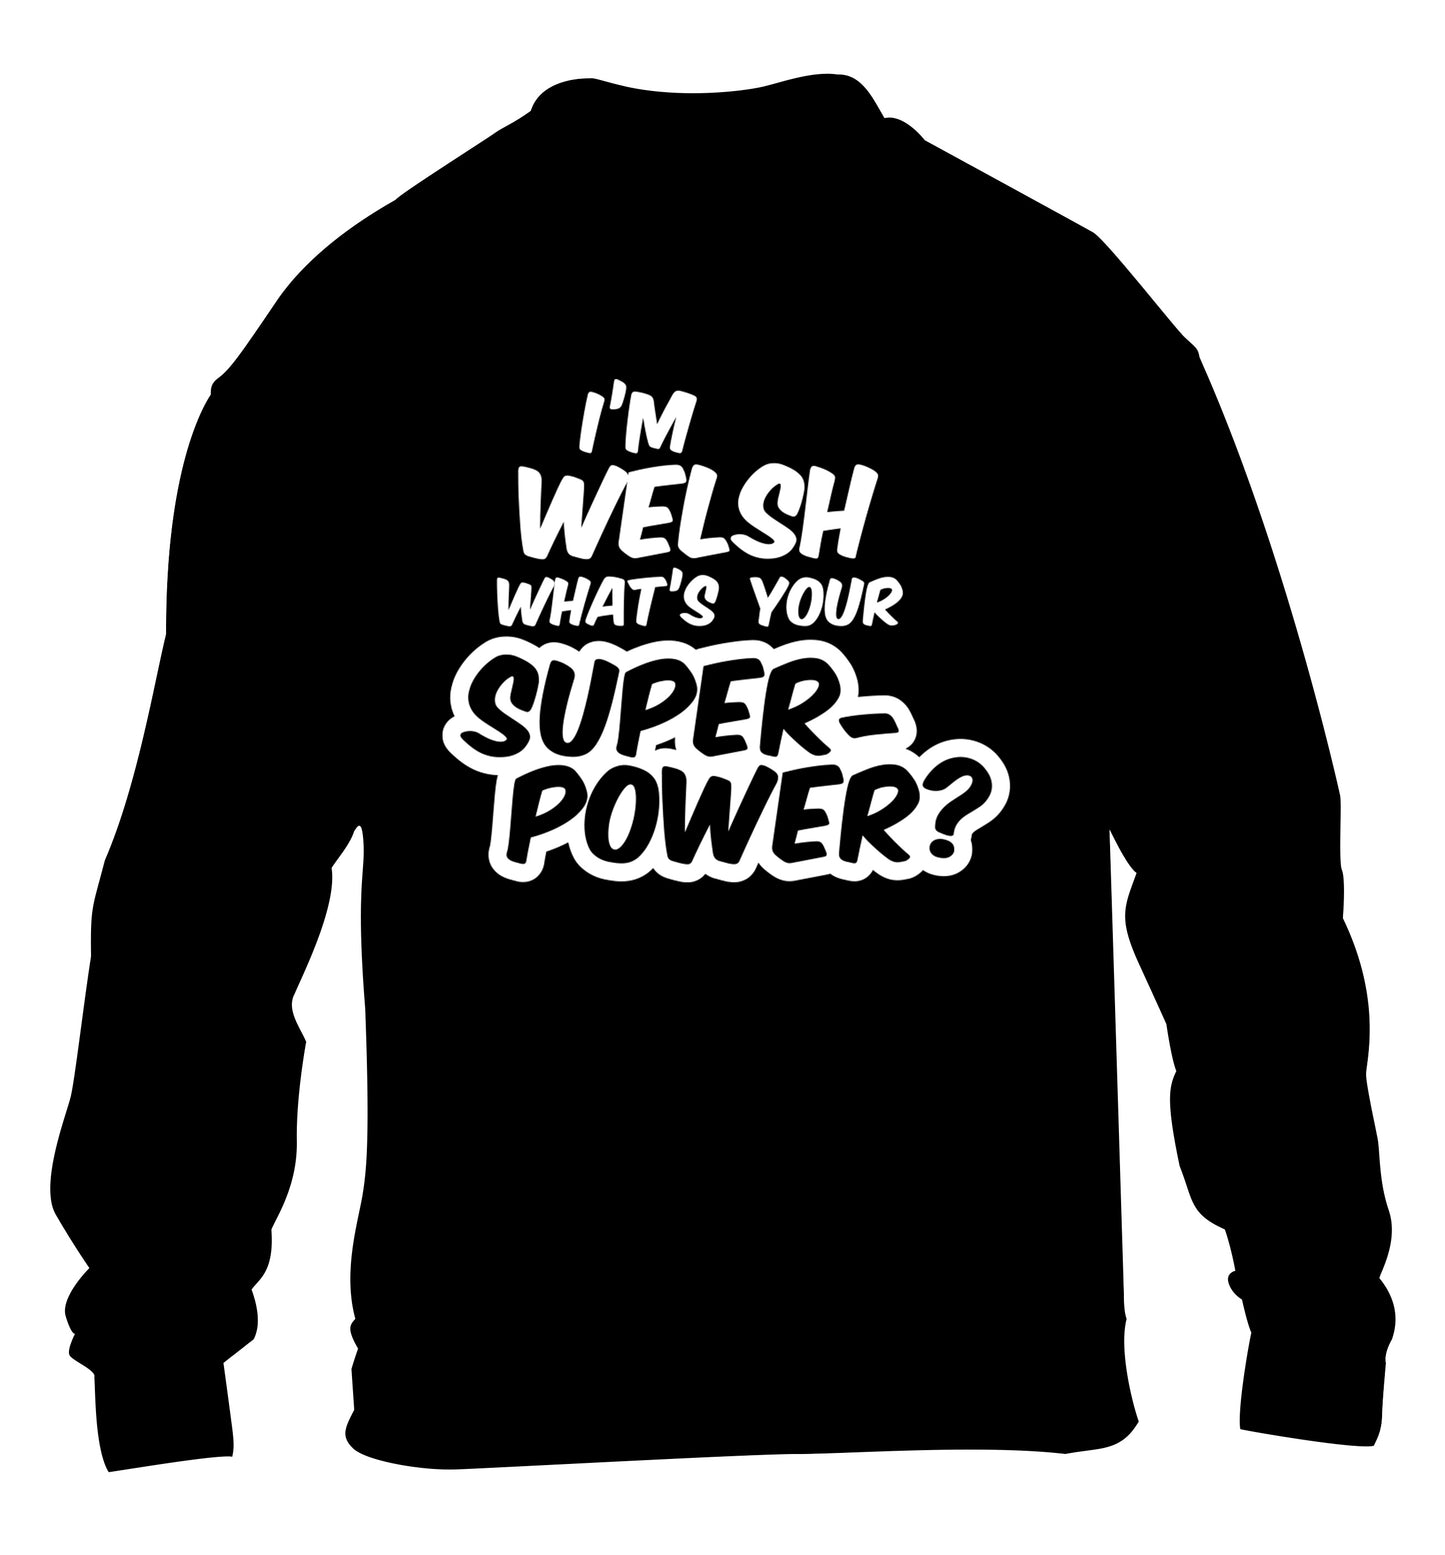 I'm Welsh what's your superpower? children's black sweater 12-13 Years